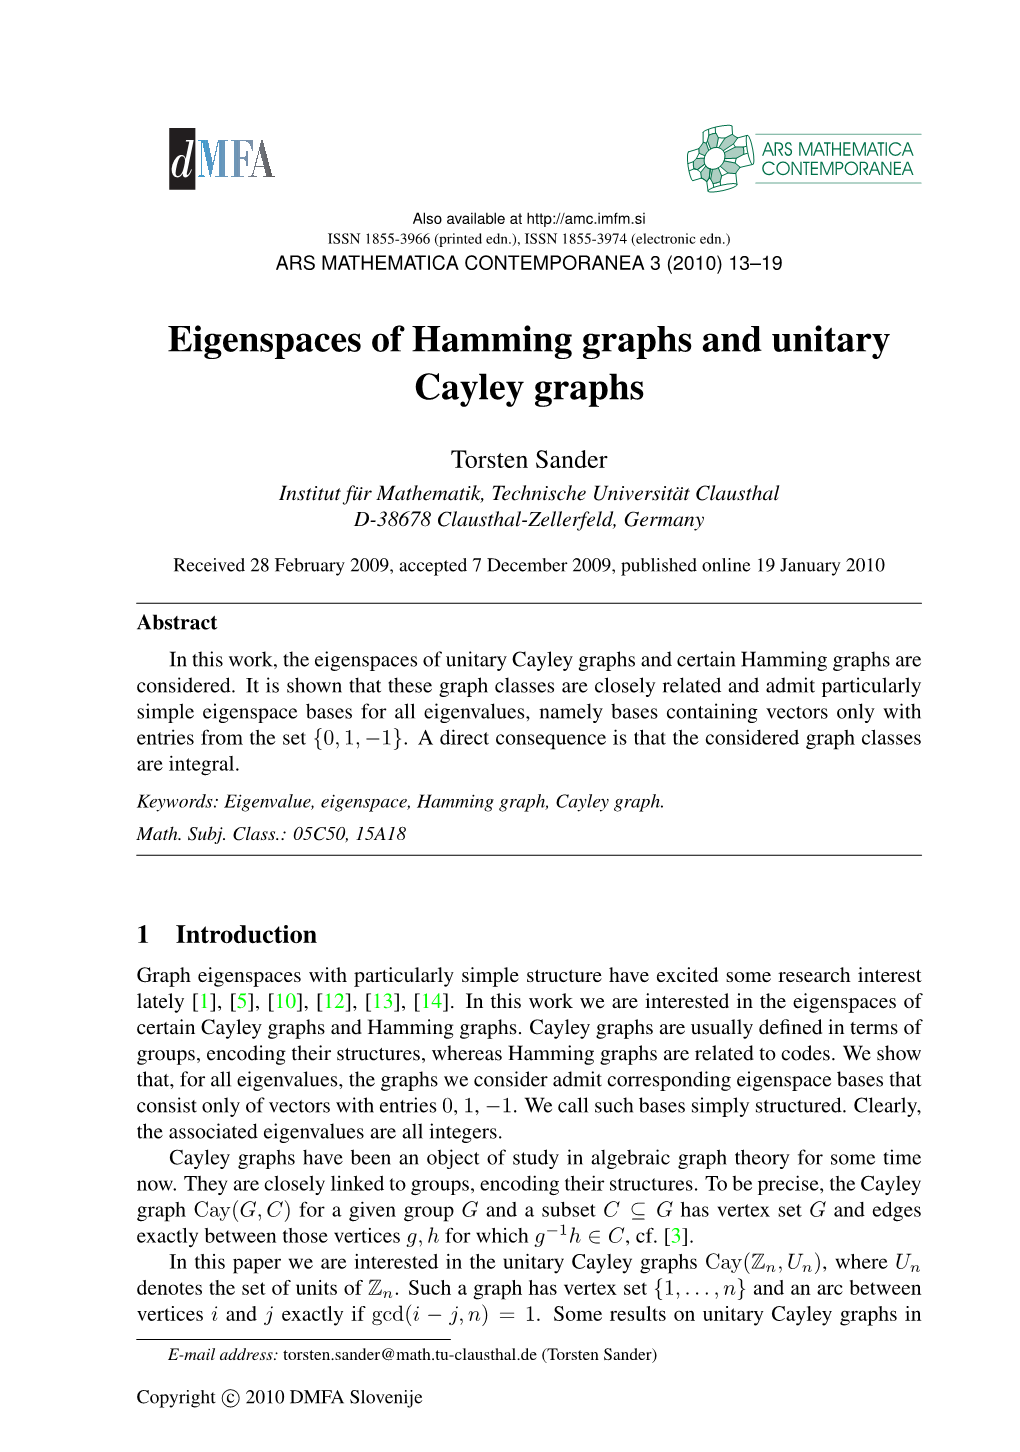 Eigenspaces of Hamming Graphs and Unitary Cayley Graphs